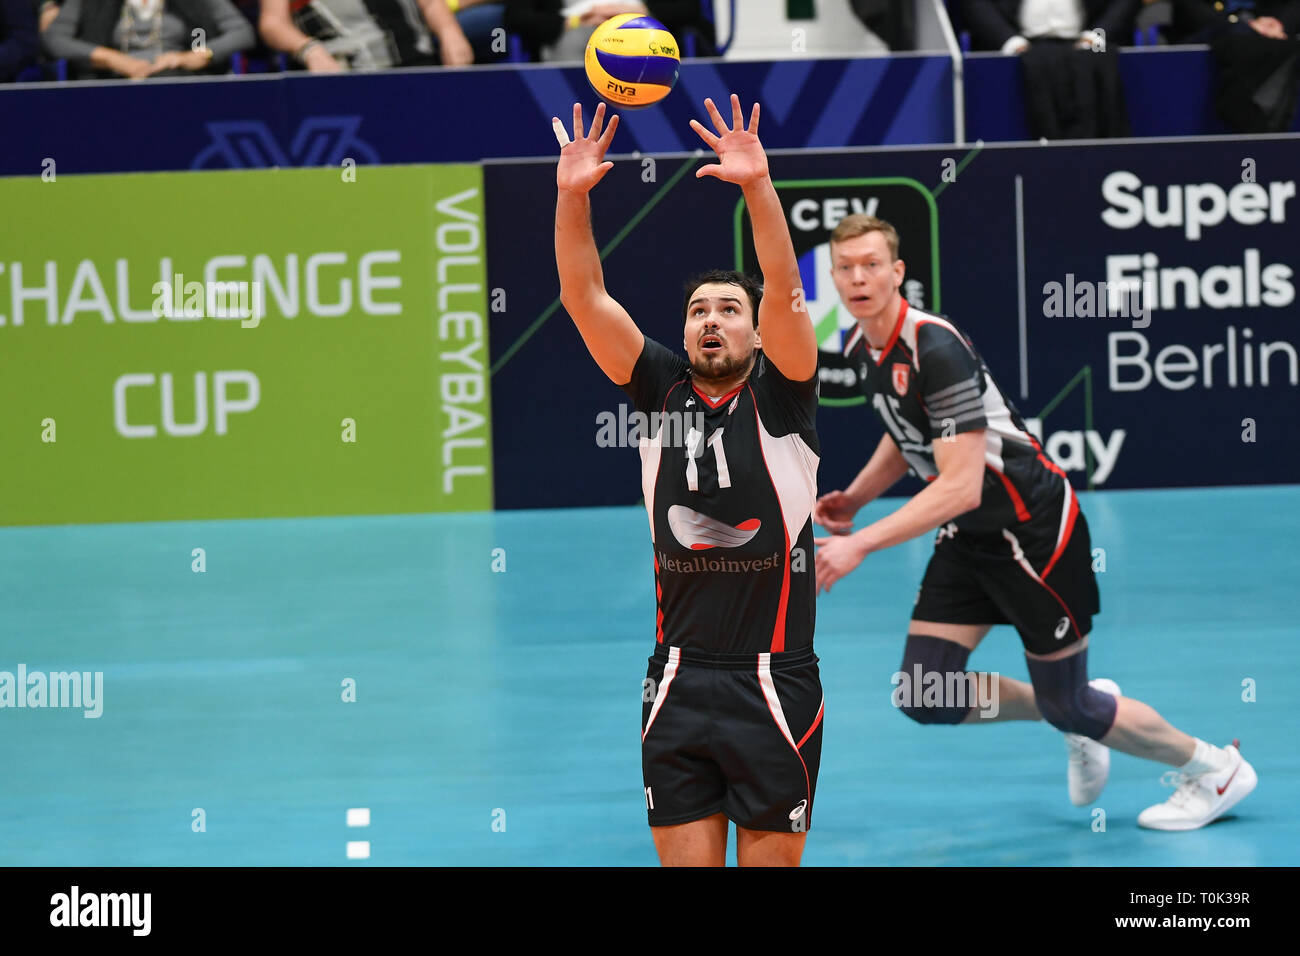 Candy Arena, Monza, Italy. 20th March, 2019. CEV Volleyball Challenge Cup men, Final, 1st leg. Roman Poroshin of Belogorie Belgorod during the match between Vero Volley Monza and Belogorie Belgorod at the Candy Arena Italy.  Credit: Claudio Grassi/Alamy Live News Stock Photo